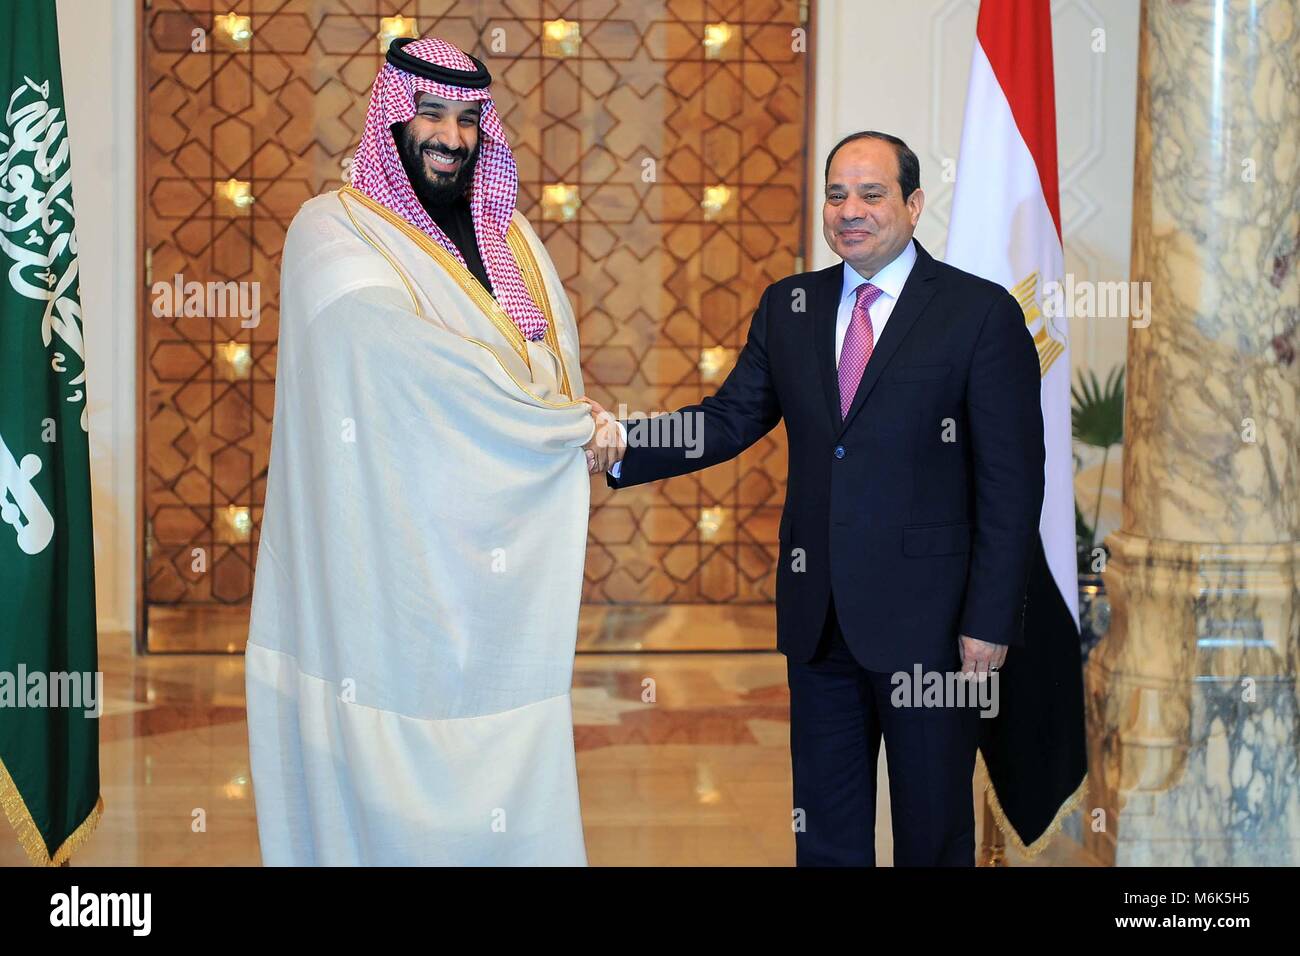 Cairo, Egypt. 4th Mar, 2018. Egyptian President Abdel-Fattah al-Sisi (R) meets with visiting Saudi Crown Prince Mohammed bin Salman in Cairo, capital of Egypt, on March 4, 2018. Egyptian President Abdel-Fattah al-Sisi reached a deal on Sunday with visiting Saudi Crown Prince Mohammed bin Salman on joint efforts to face divisive regional interventions. Credit: MENA/Xinhua/Alamy Live News Stock Photo